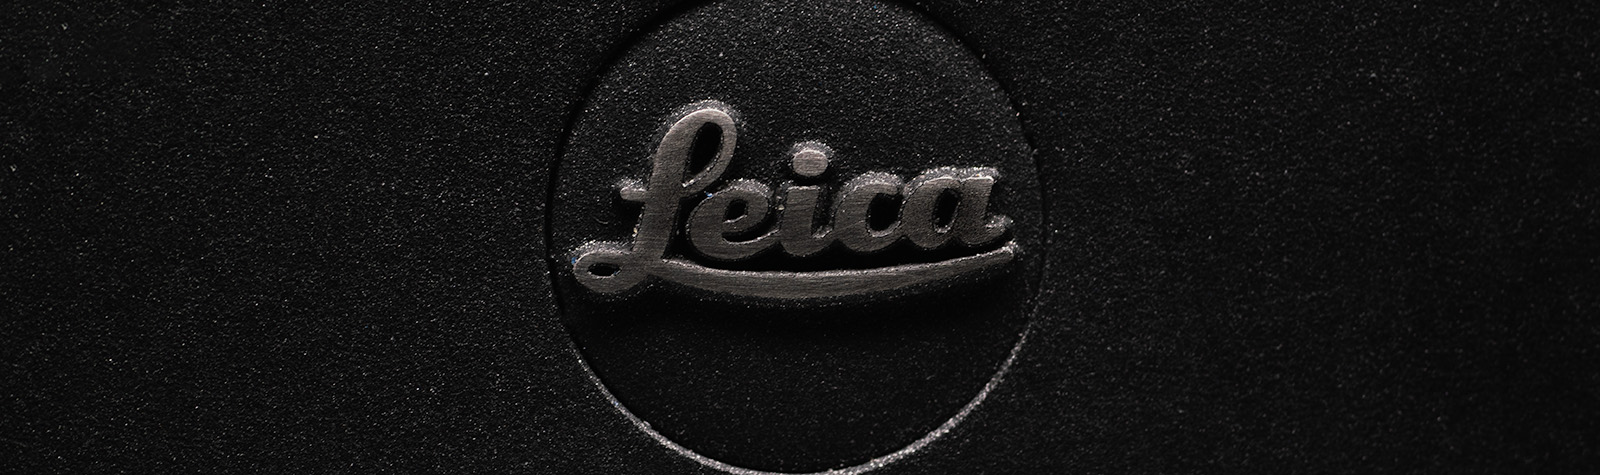 Welcome to the underground. Camera brokers, dealers, bespoke vendors, and purveyors of Leica cameras and other fine photographic equipment